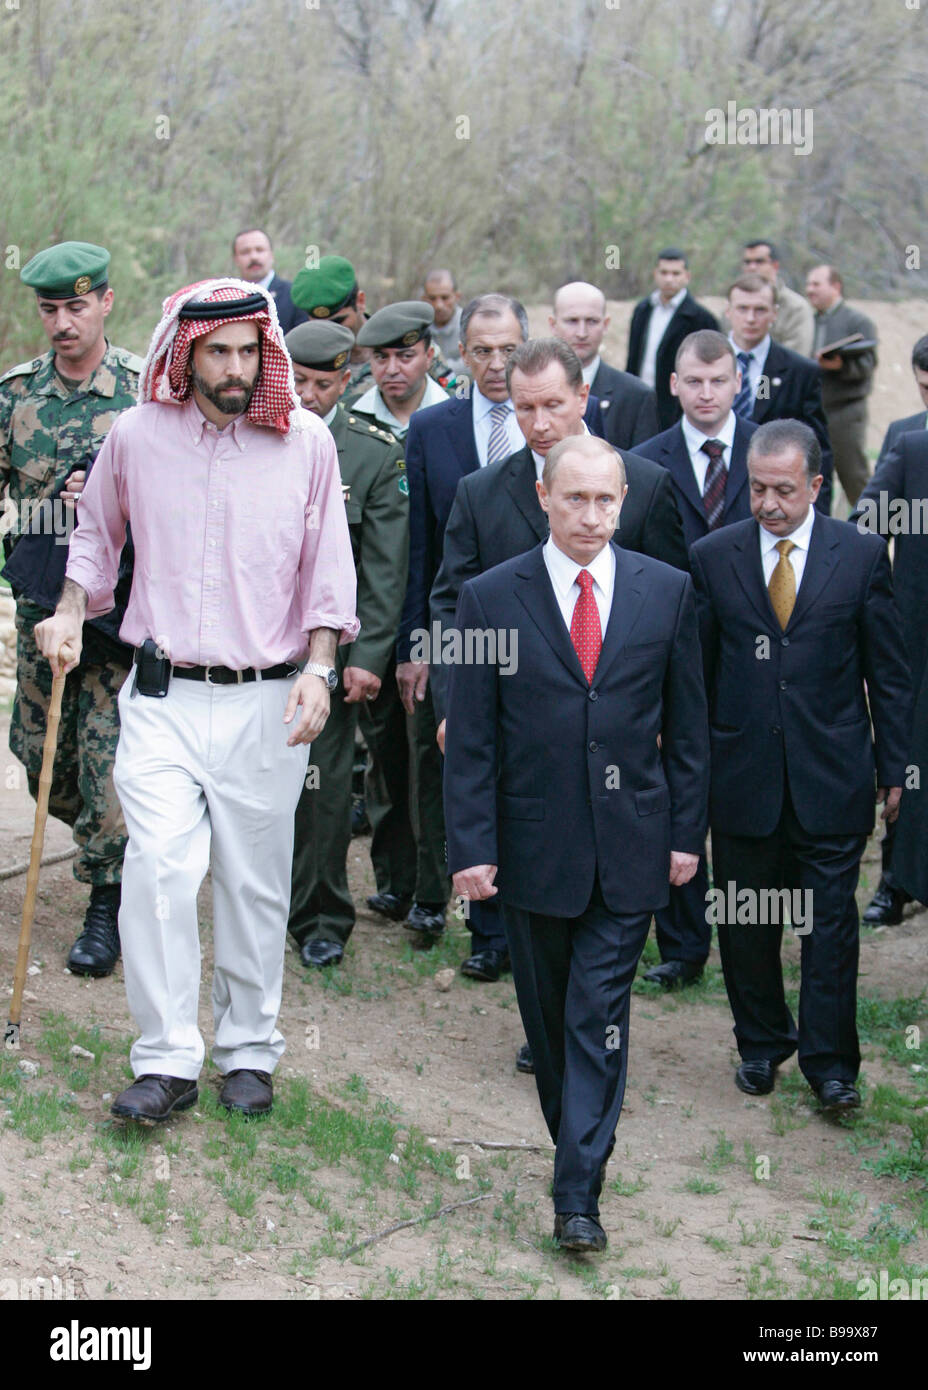 HRH Prince Ghazi cousin of King Abdullah II of Jordan and Russian President  Vladimir Putin from left to right in the foreground Stock Photo - Alamy